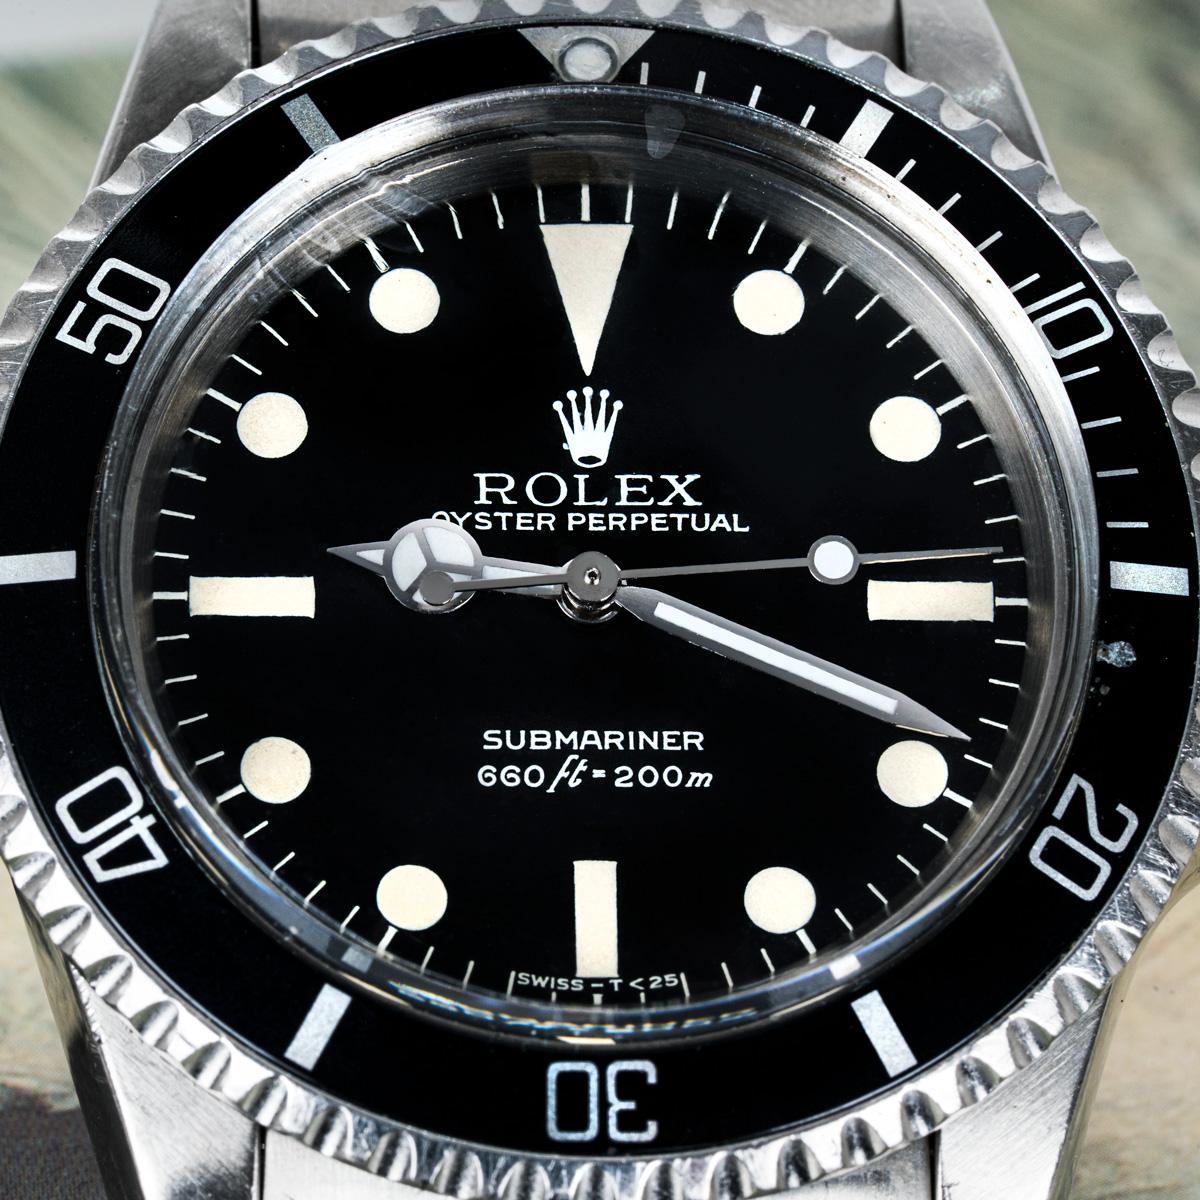 A 40mm stainless steel Submariner Non-Date by Rolex. Featuring a distinctive black Mark III maxi dial. The features of this particular dial include:

• Large tritium hour plots that often appear to touch the 5-minute hash marks, giving it the